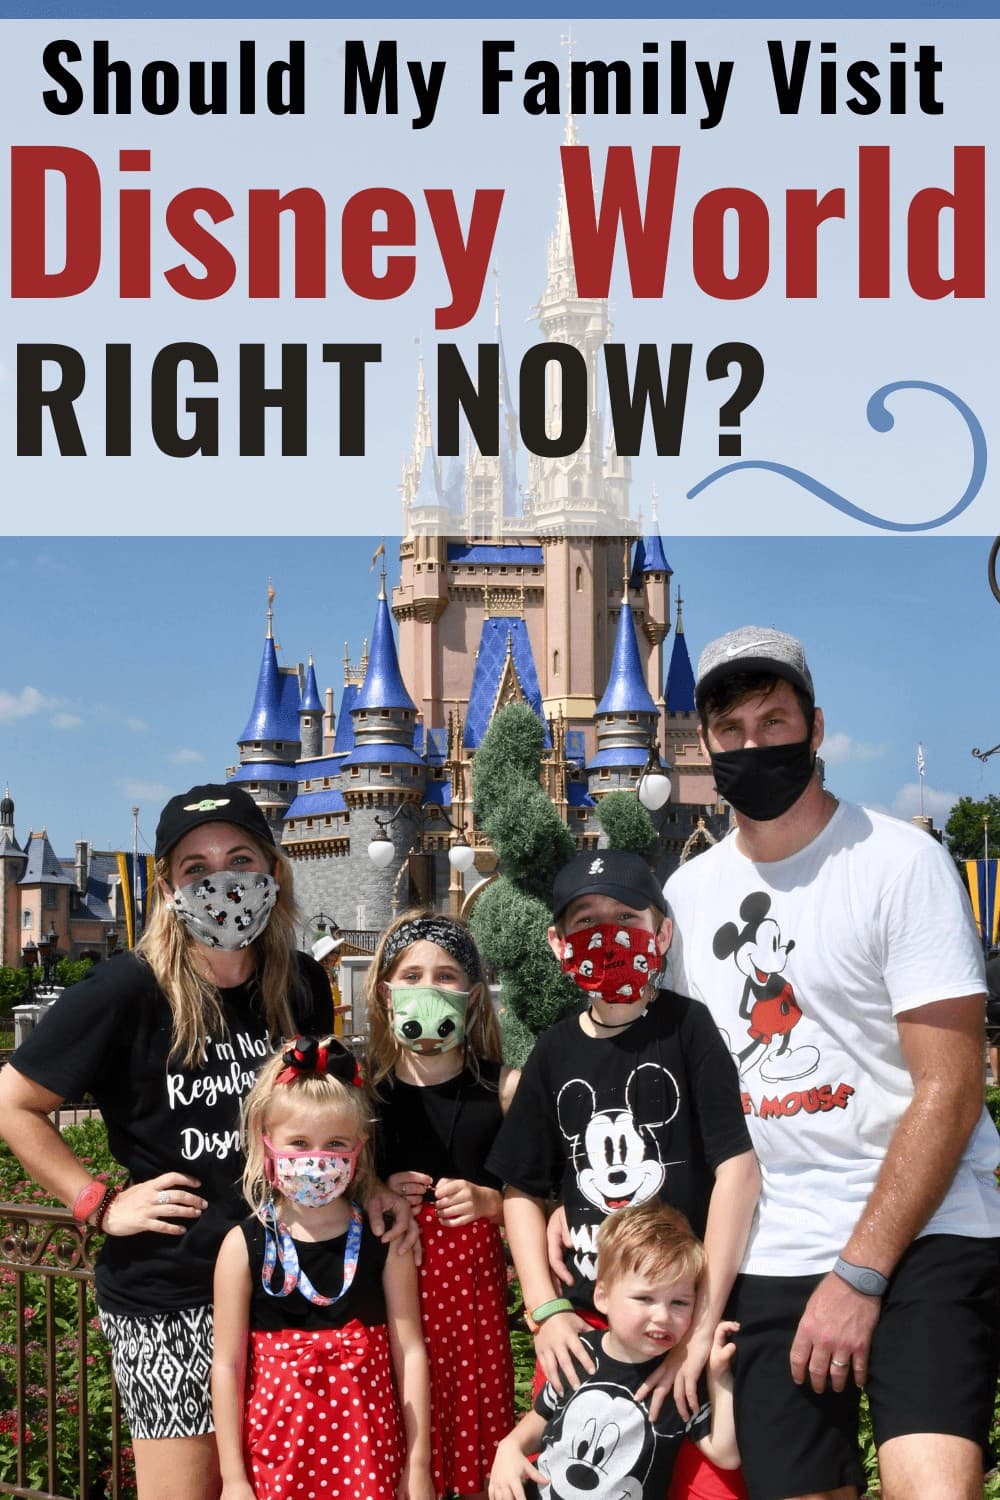 Should I Visit Disney World Right Now? Taking a Disney Trip in 2020 or 2021